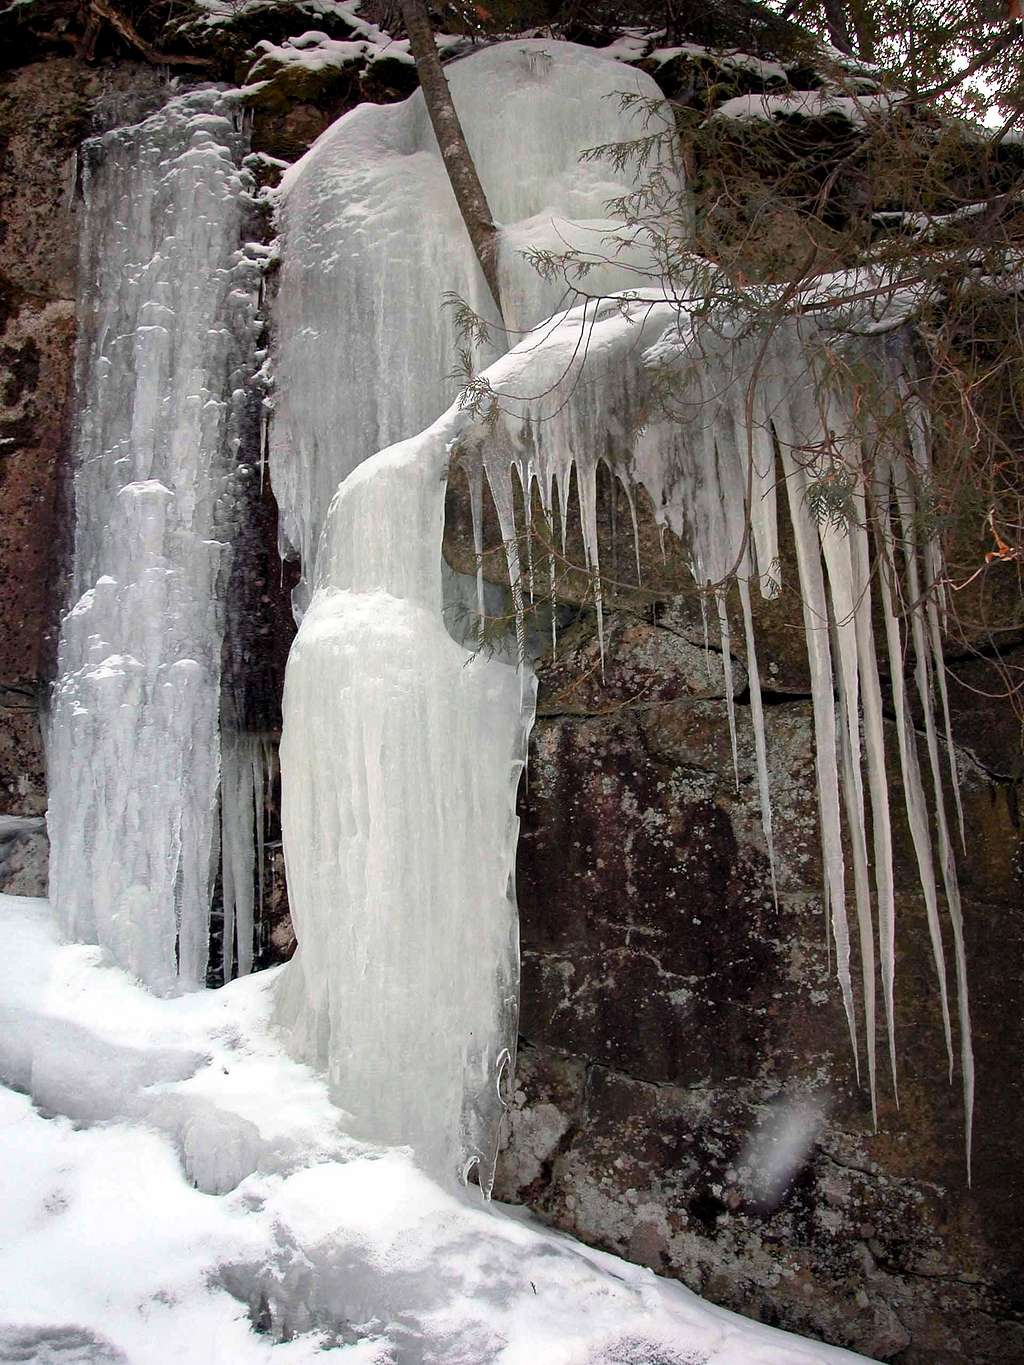 Icicles along the trail